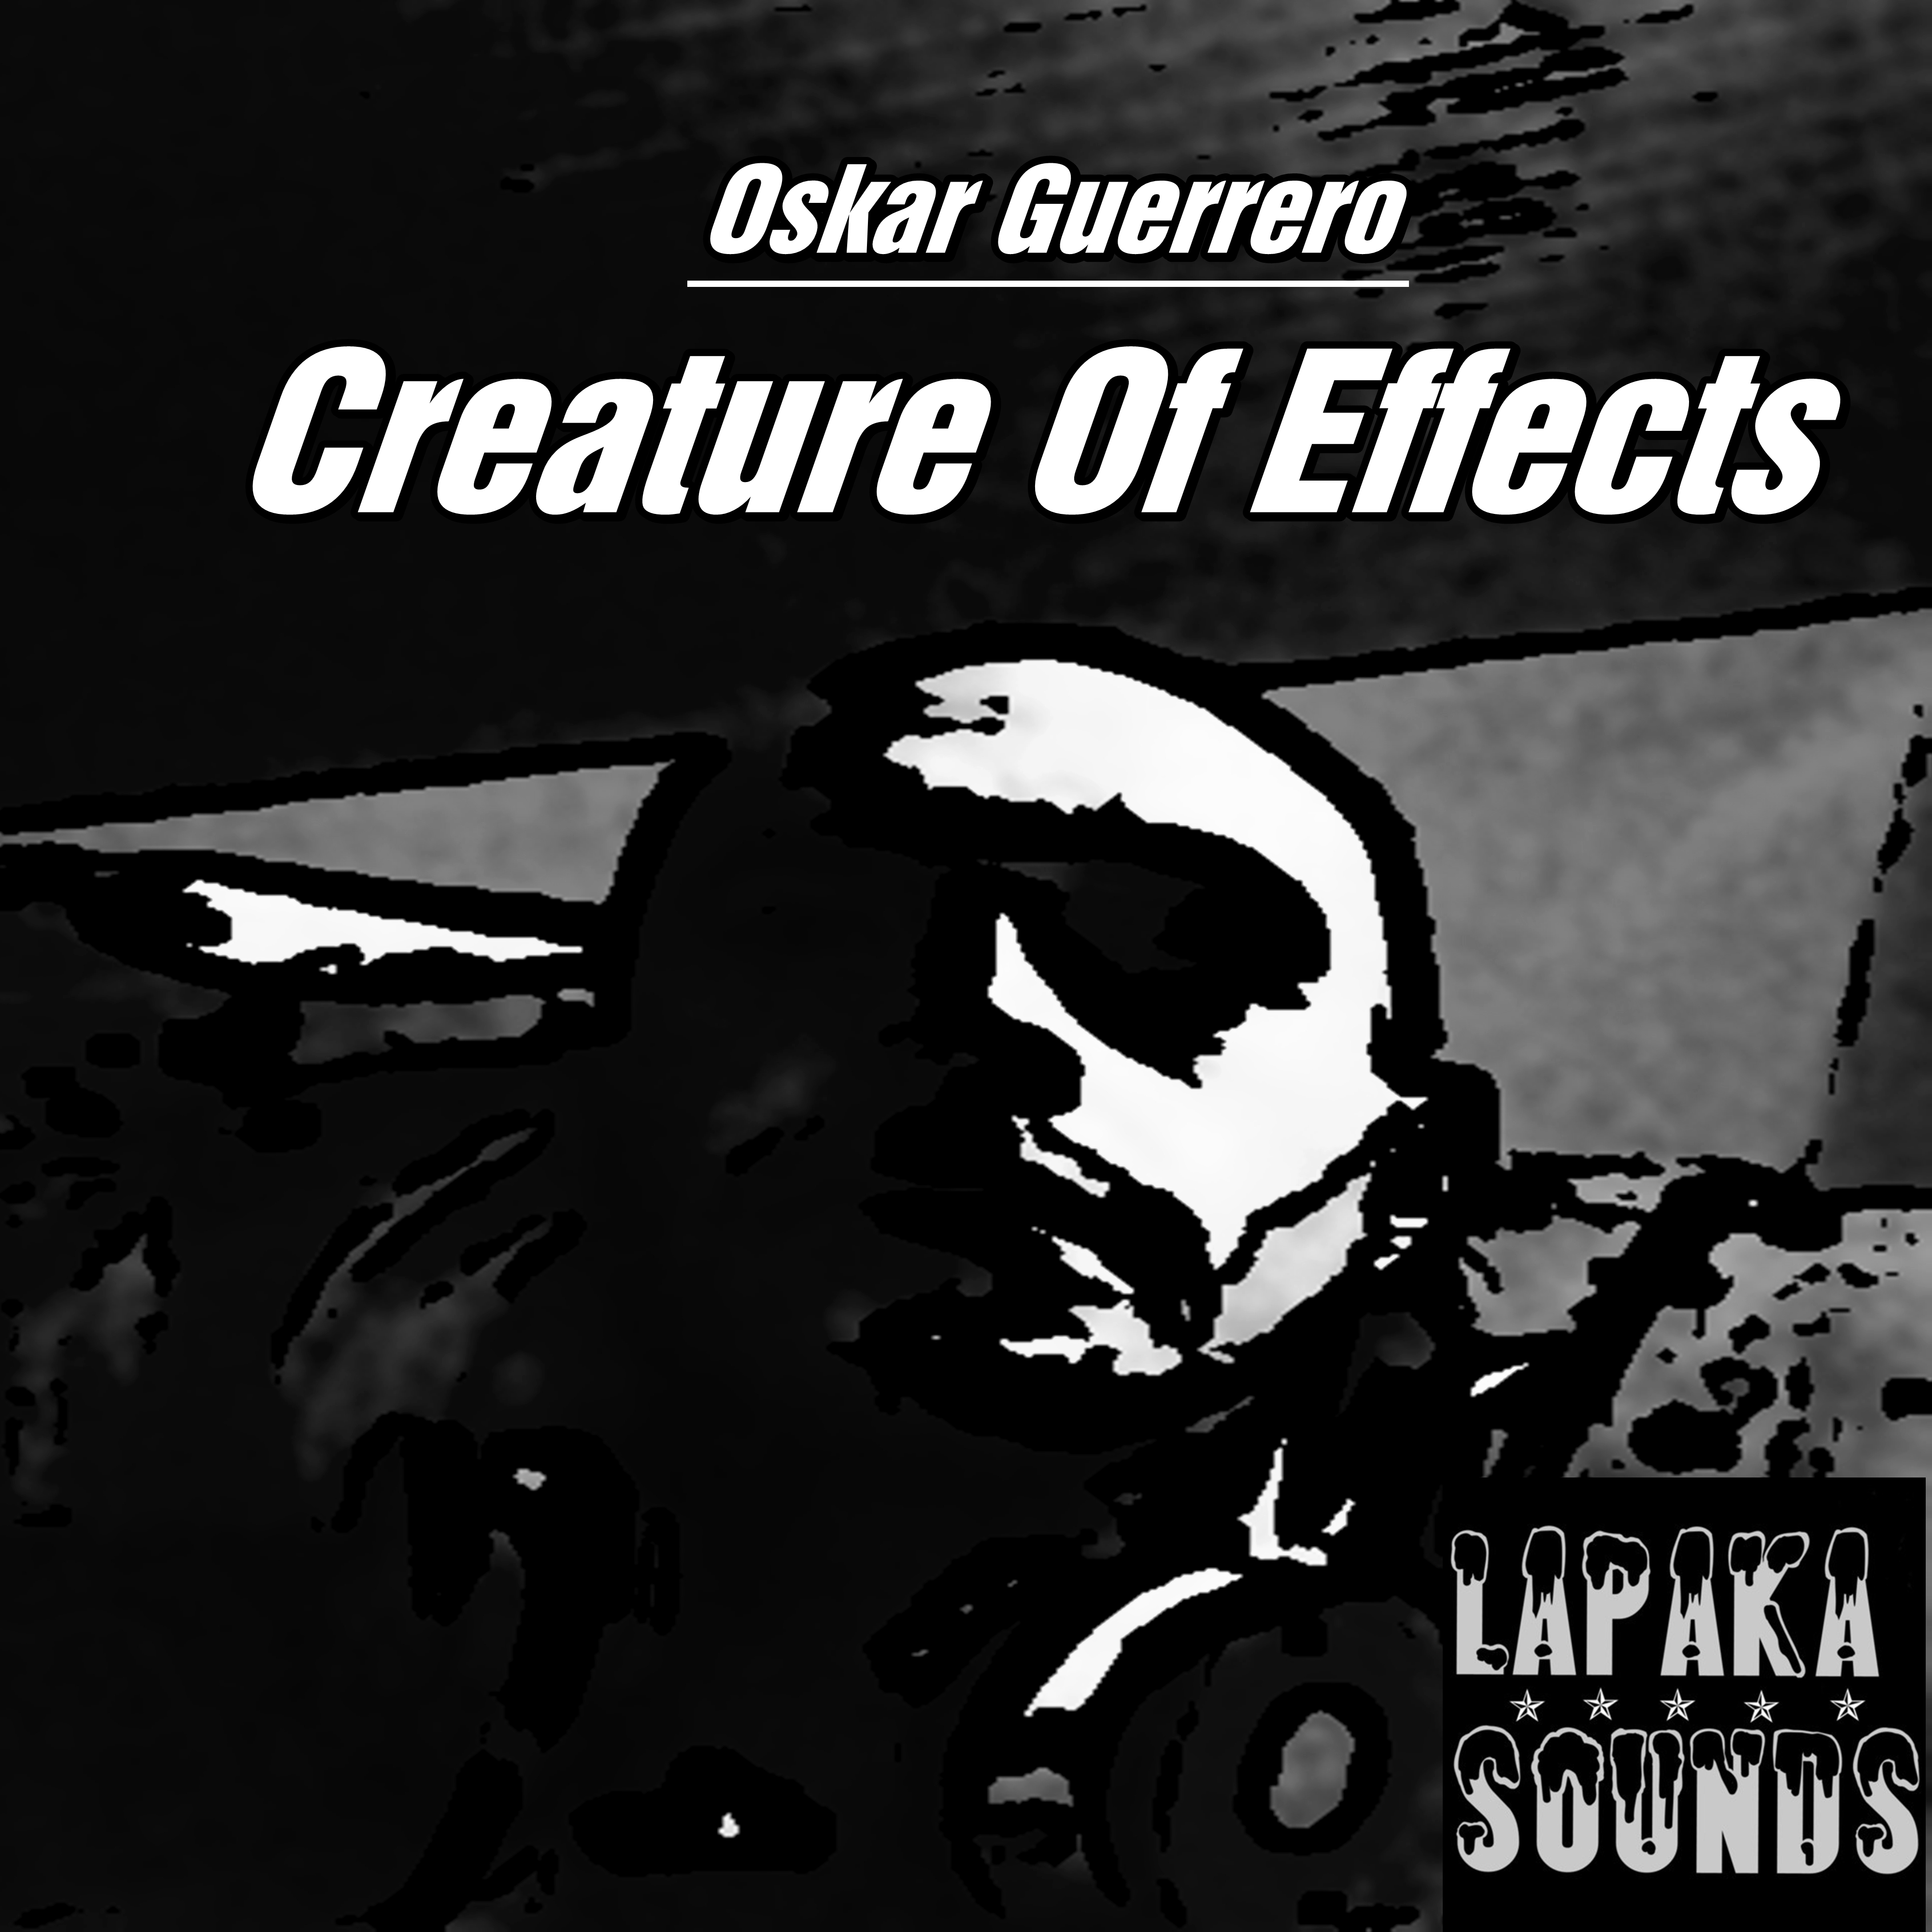 Creature of Effects